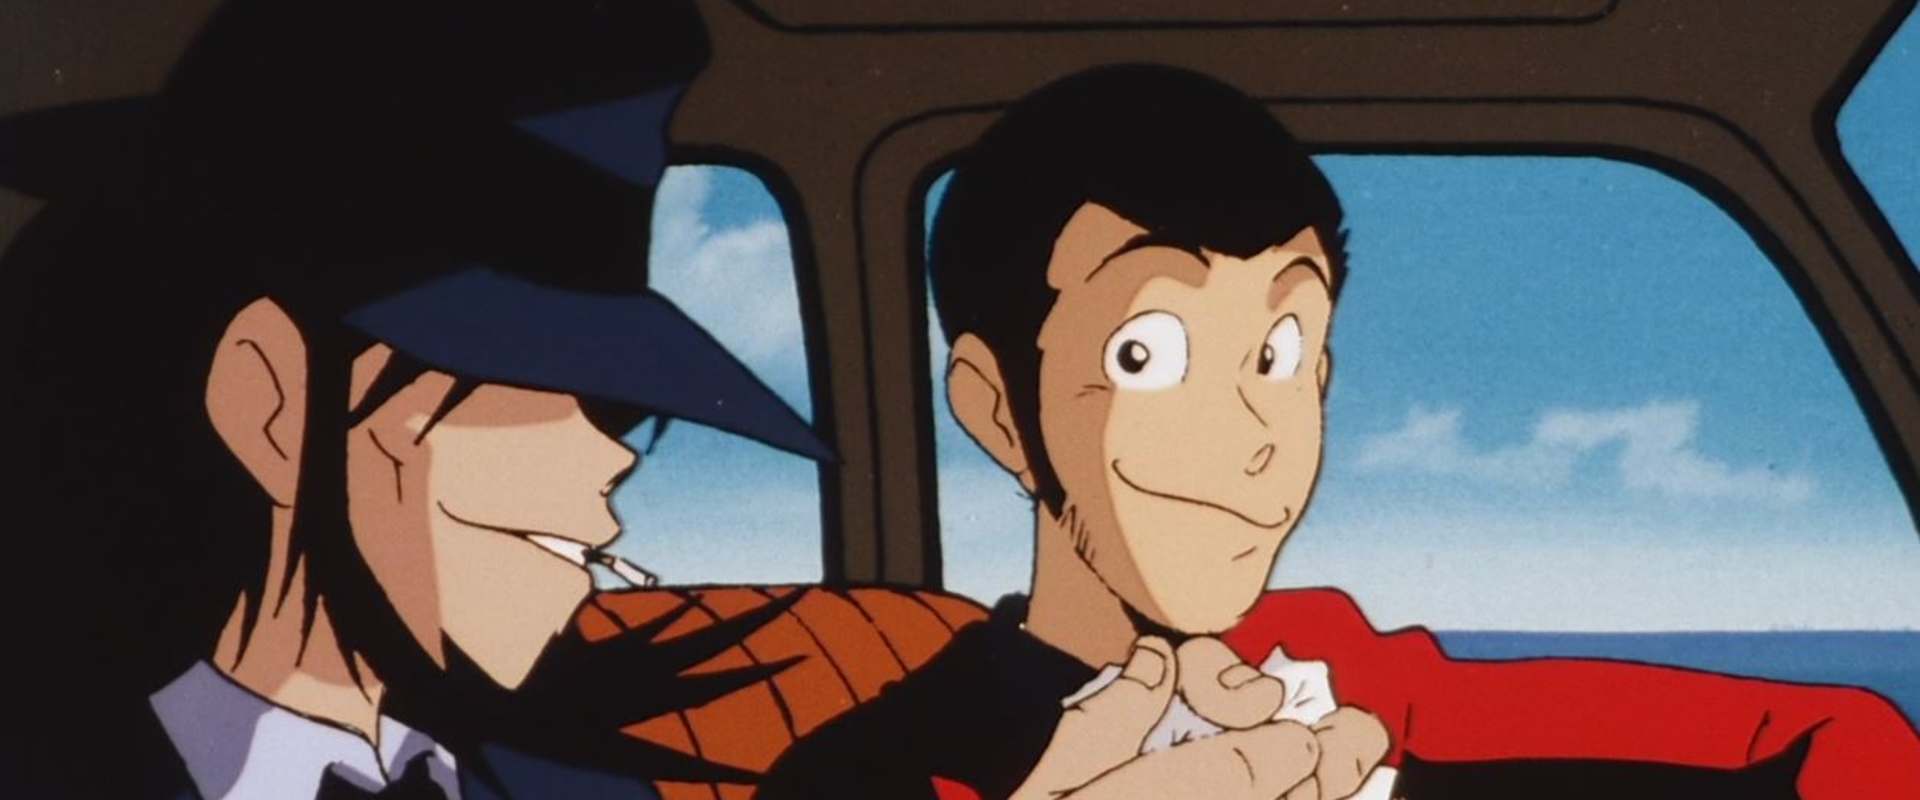 Lupin the Third: Voyage to Danger background 2